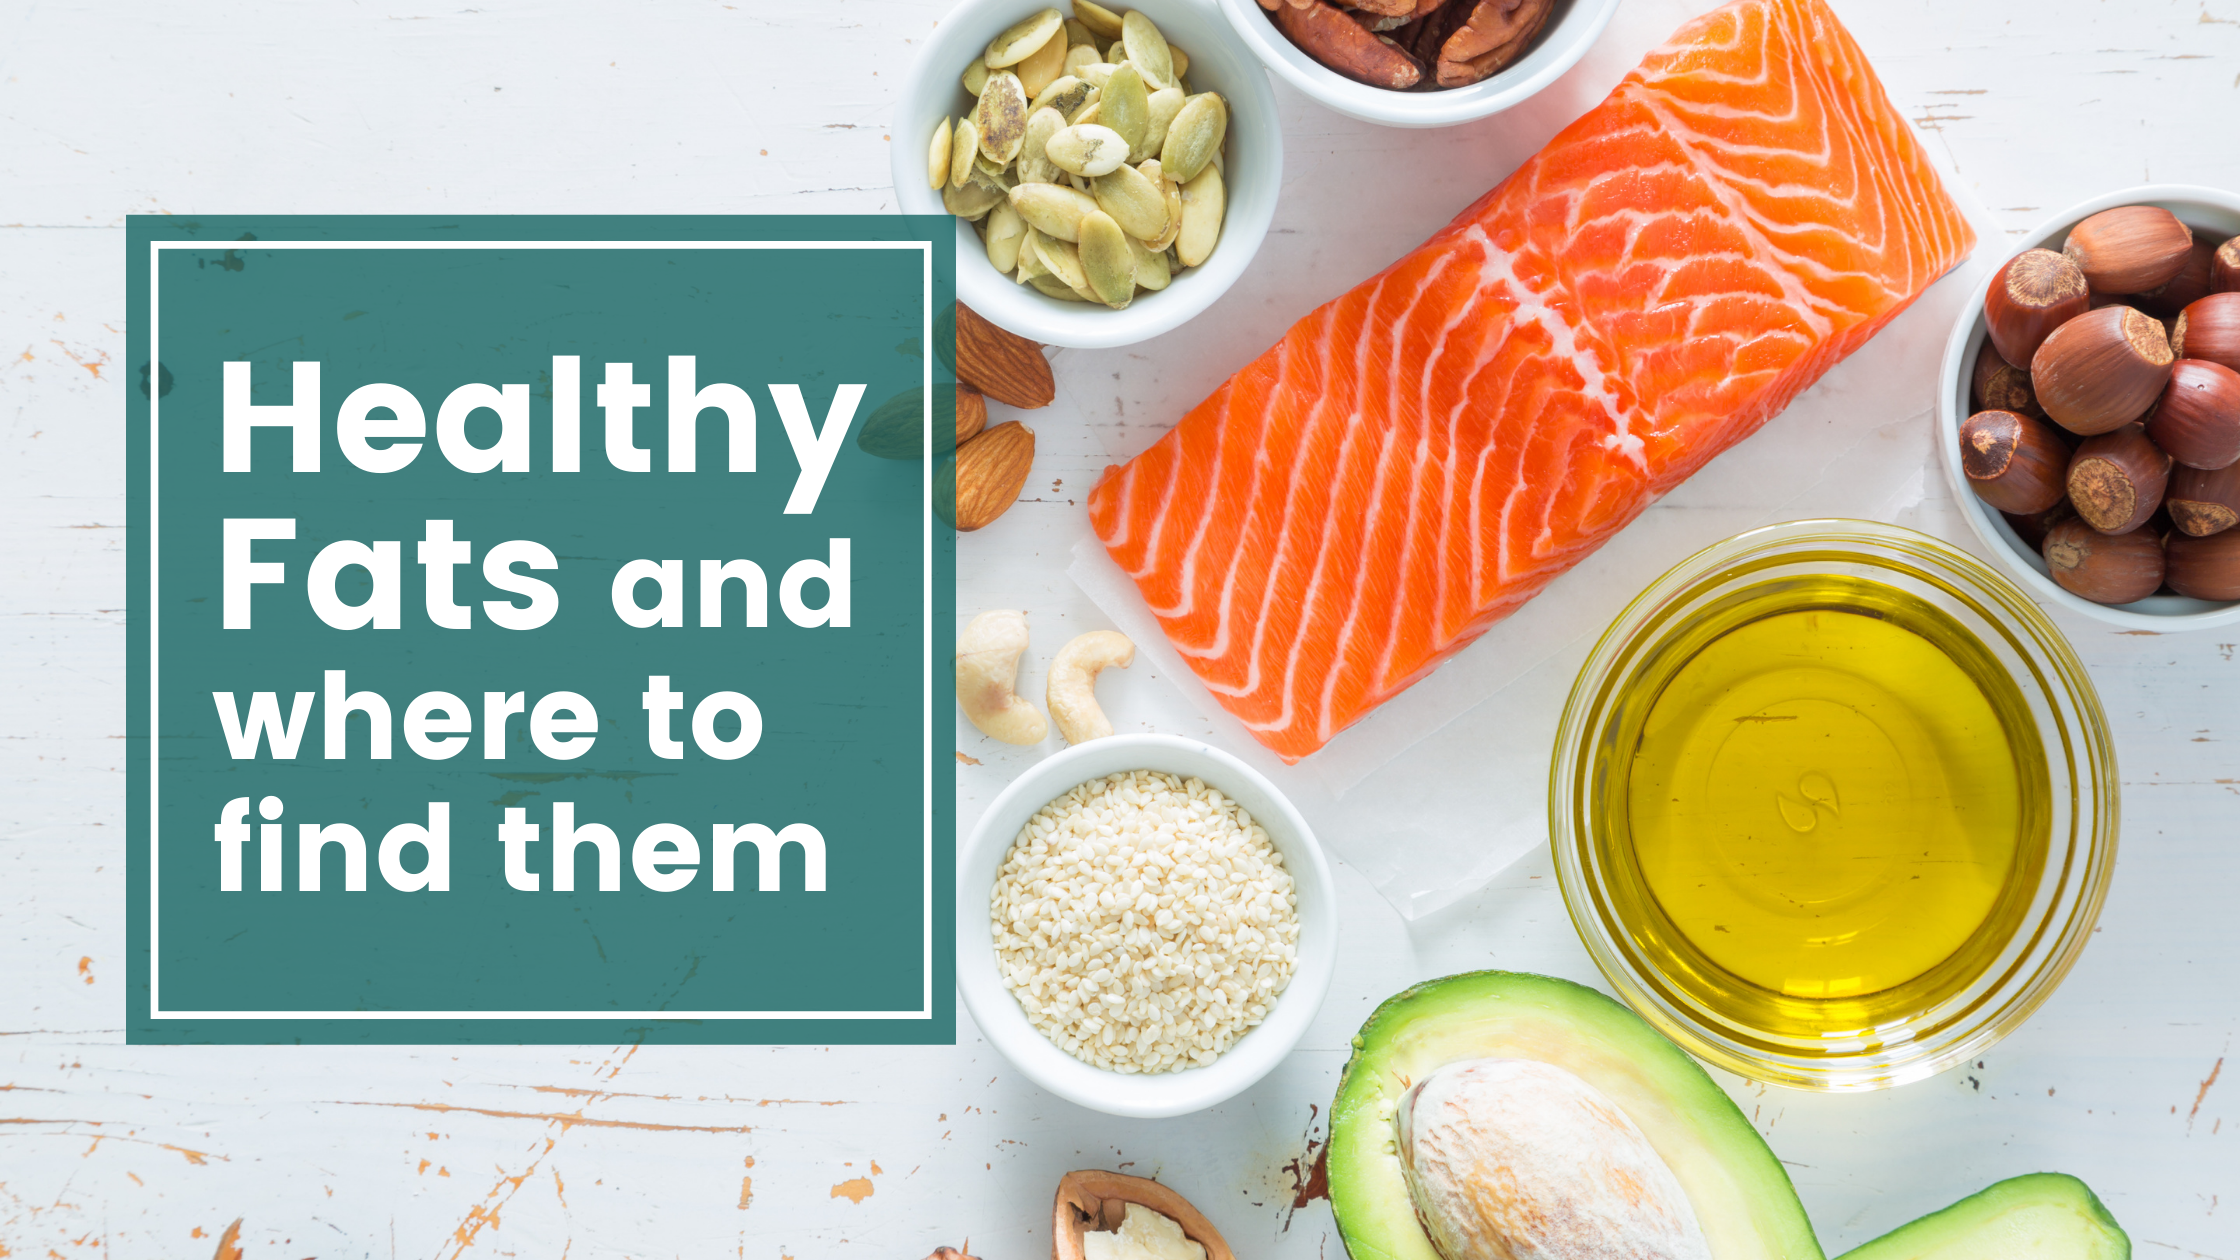 Healthy Fats and where to find them